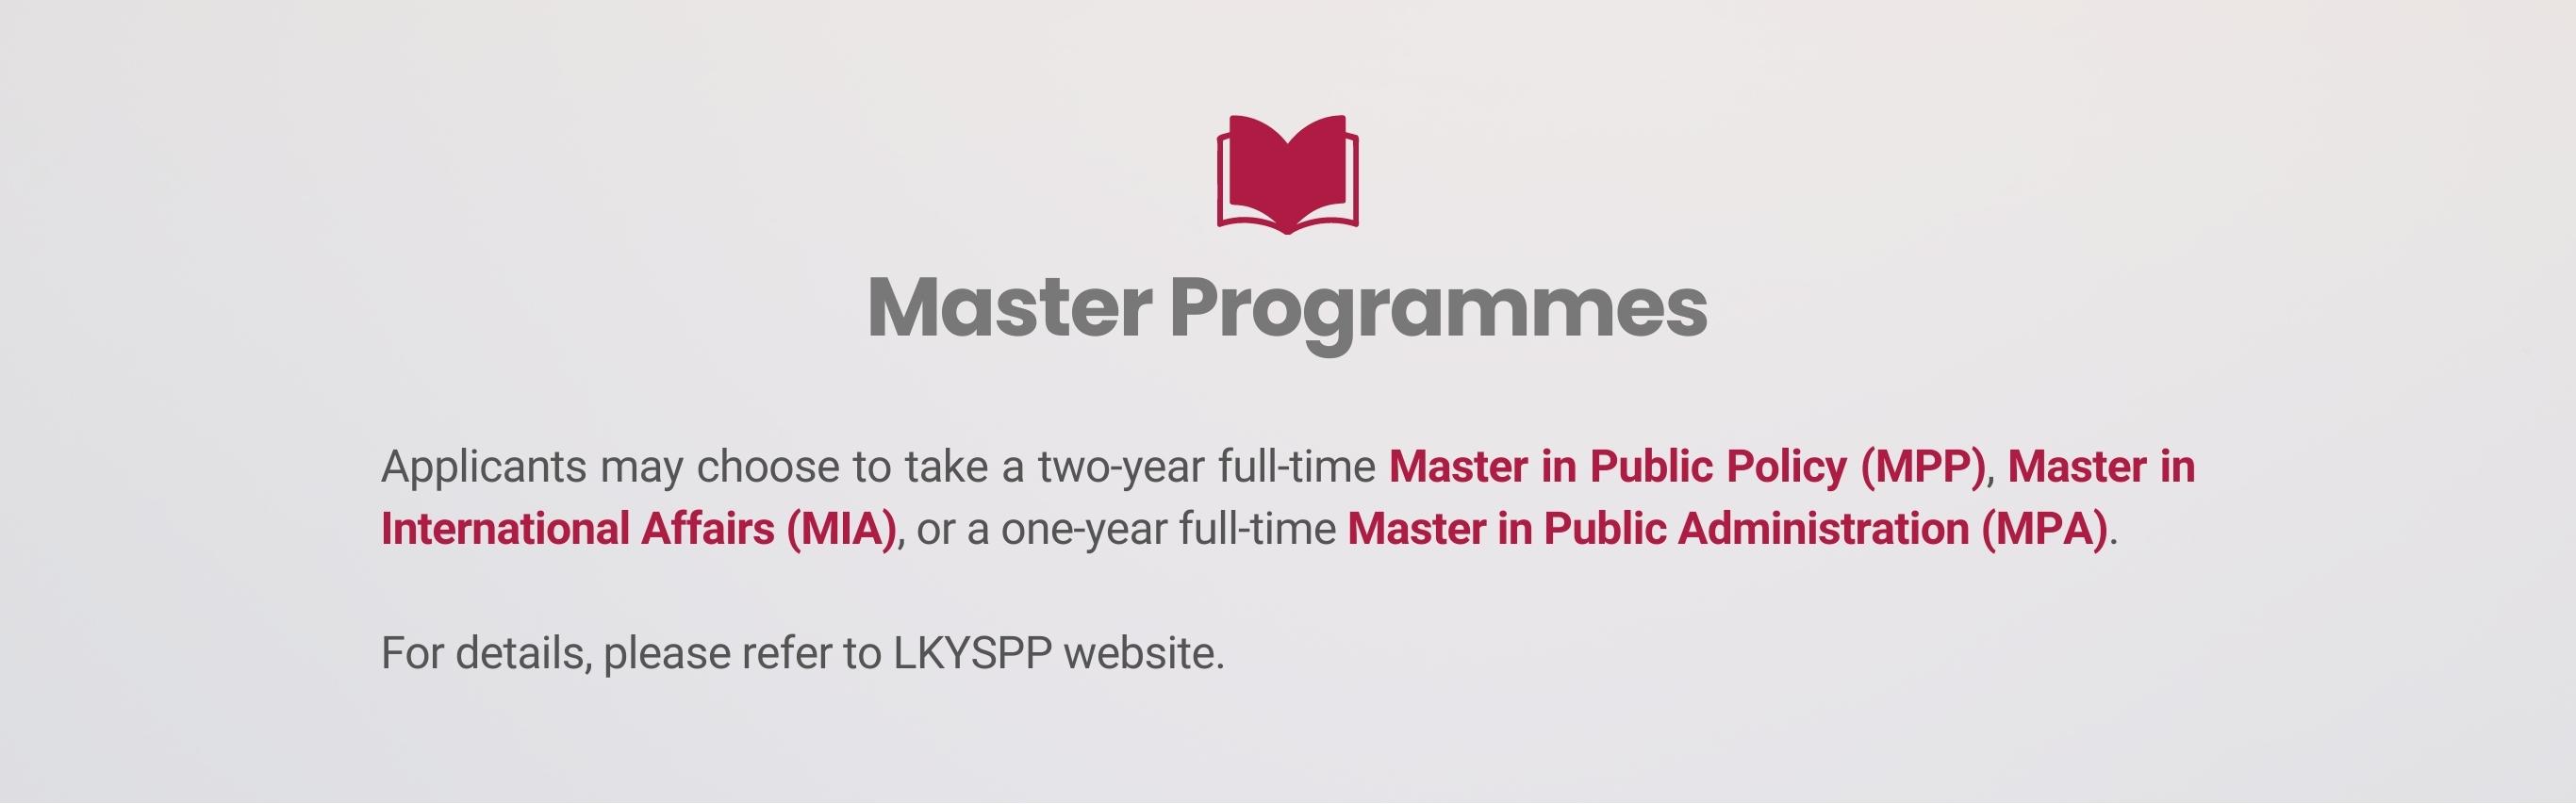 Master Programmes Applicants may choose to take a two-year full-time Master in Public Policy (MPP), Master in International Affairs (MIA), or a one-year full-time Master in Public Administration (MPA).   For details, please refer to LKYSPP website.